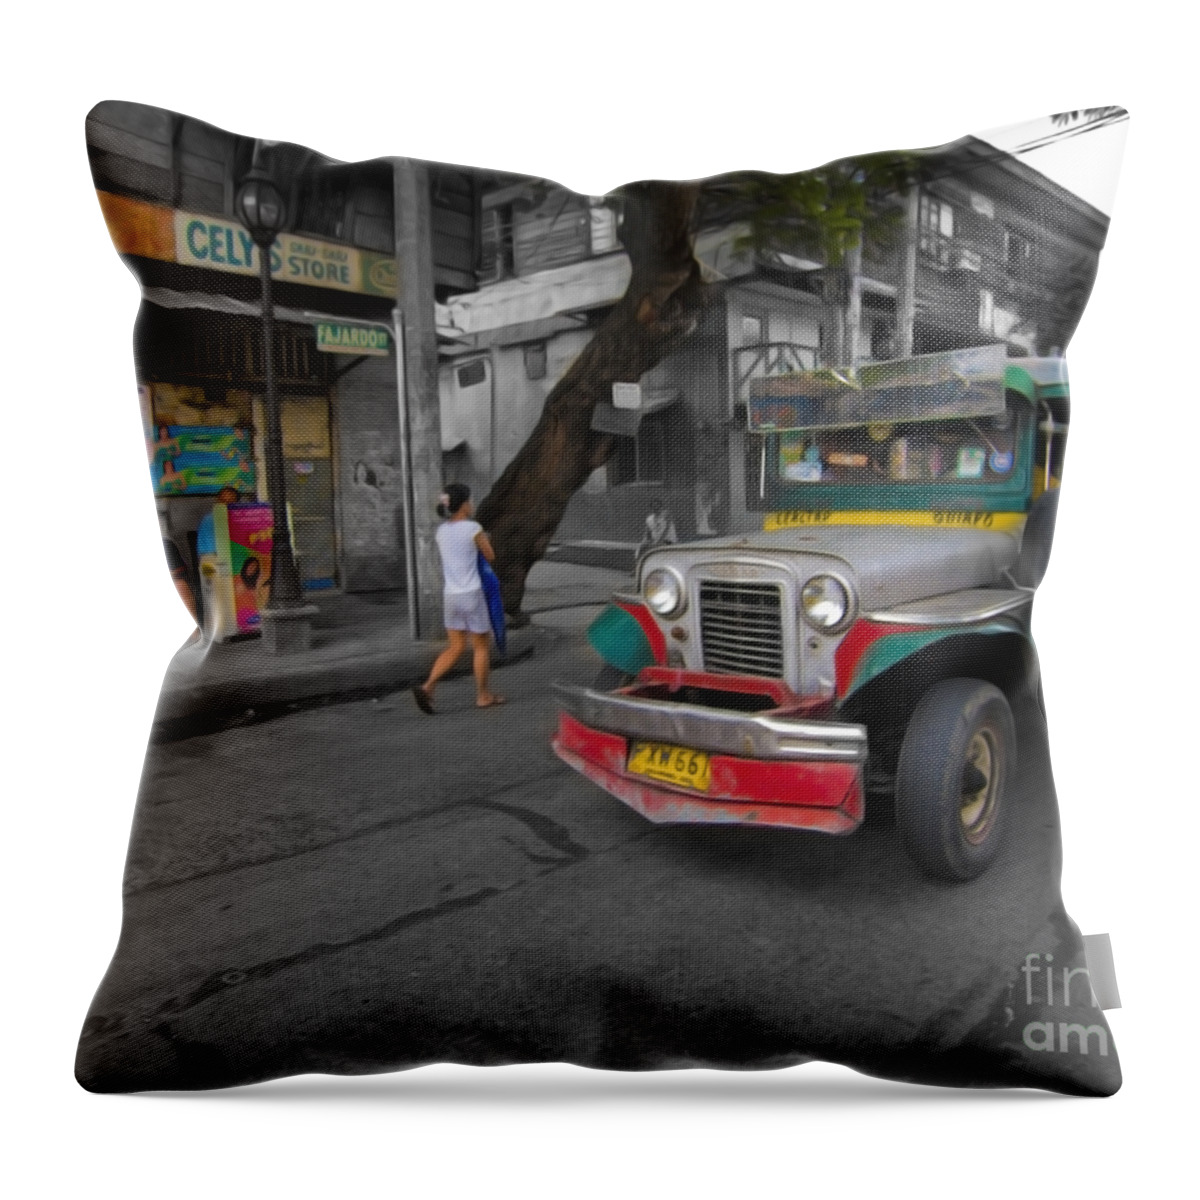 Asia Throw Pillow featuring the photograph Asia Philippines Jeepney Sari Sari Store 6282092SC by Rolf Bertram